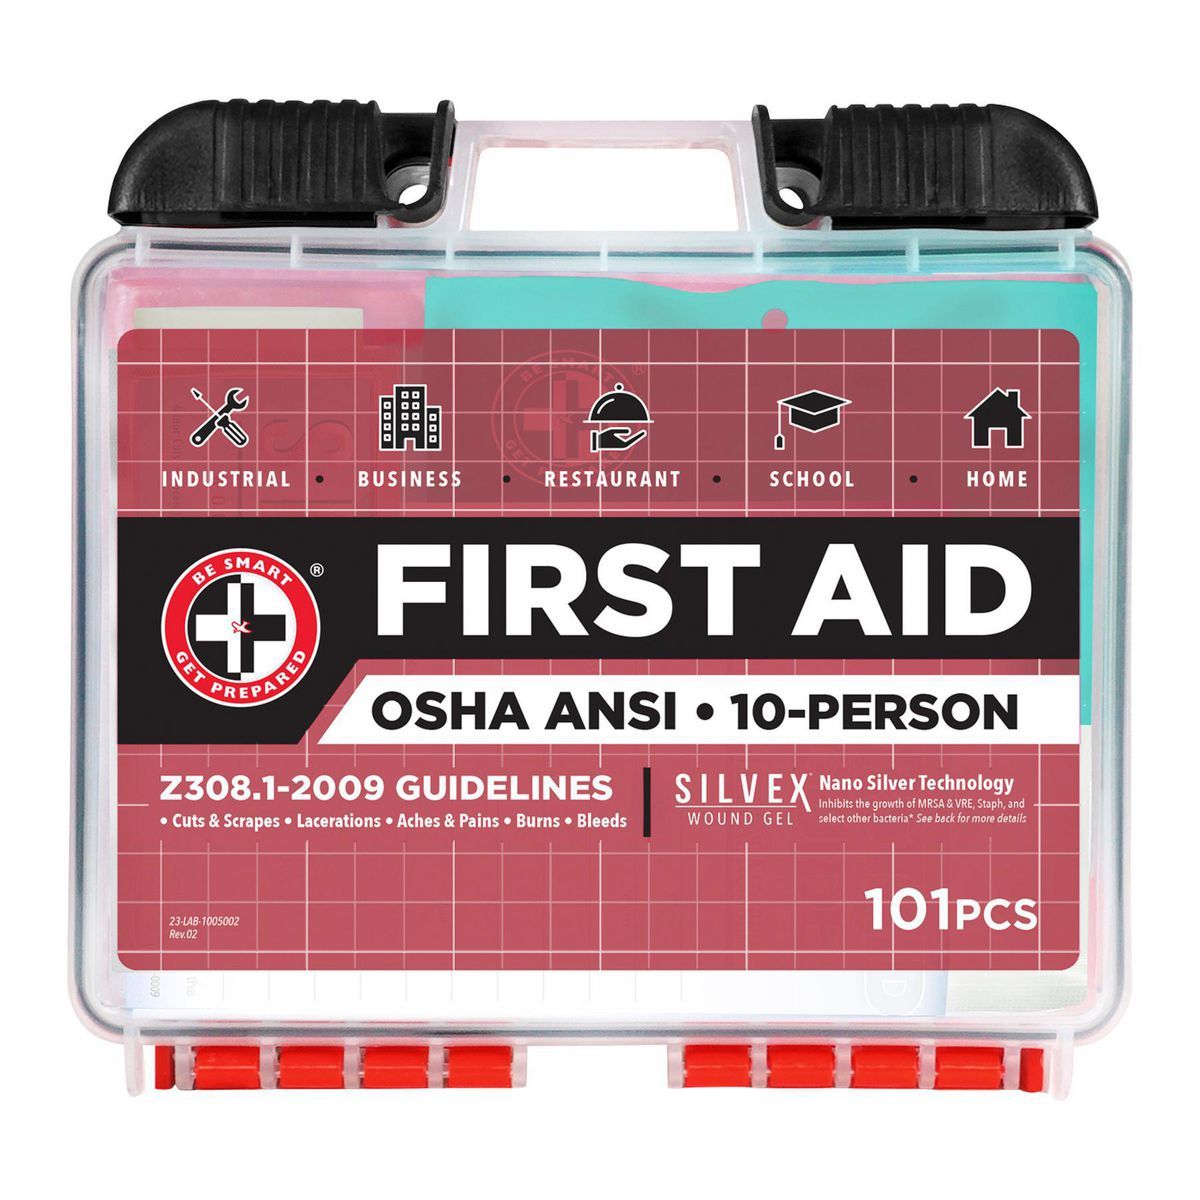 10-Person First Aid Kit, 101-Piece